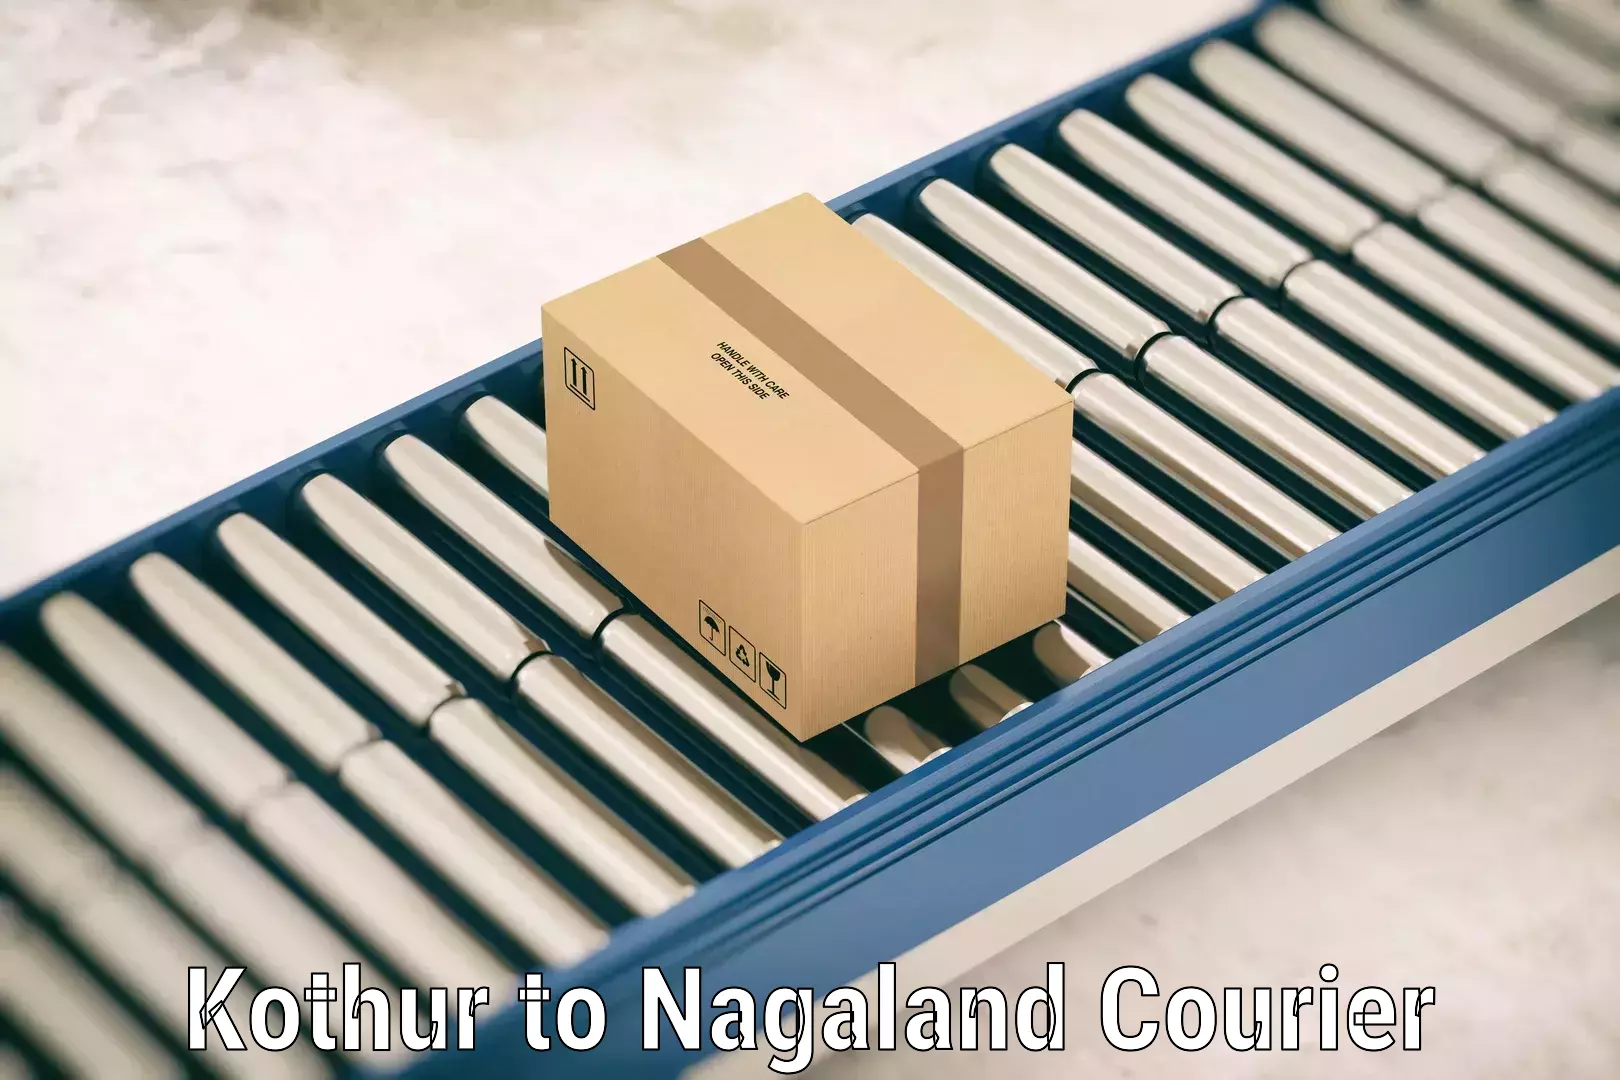 Luggage delivery network Kothur to Nagaland